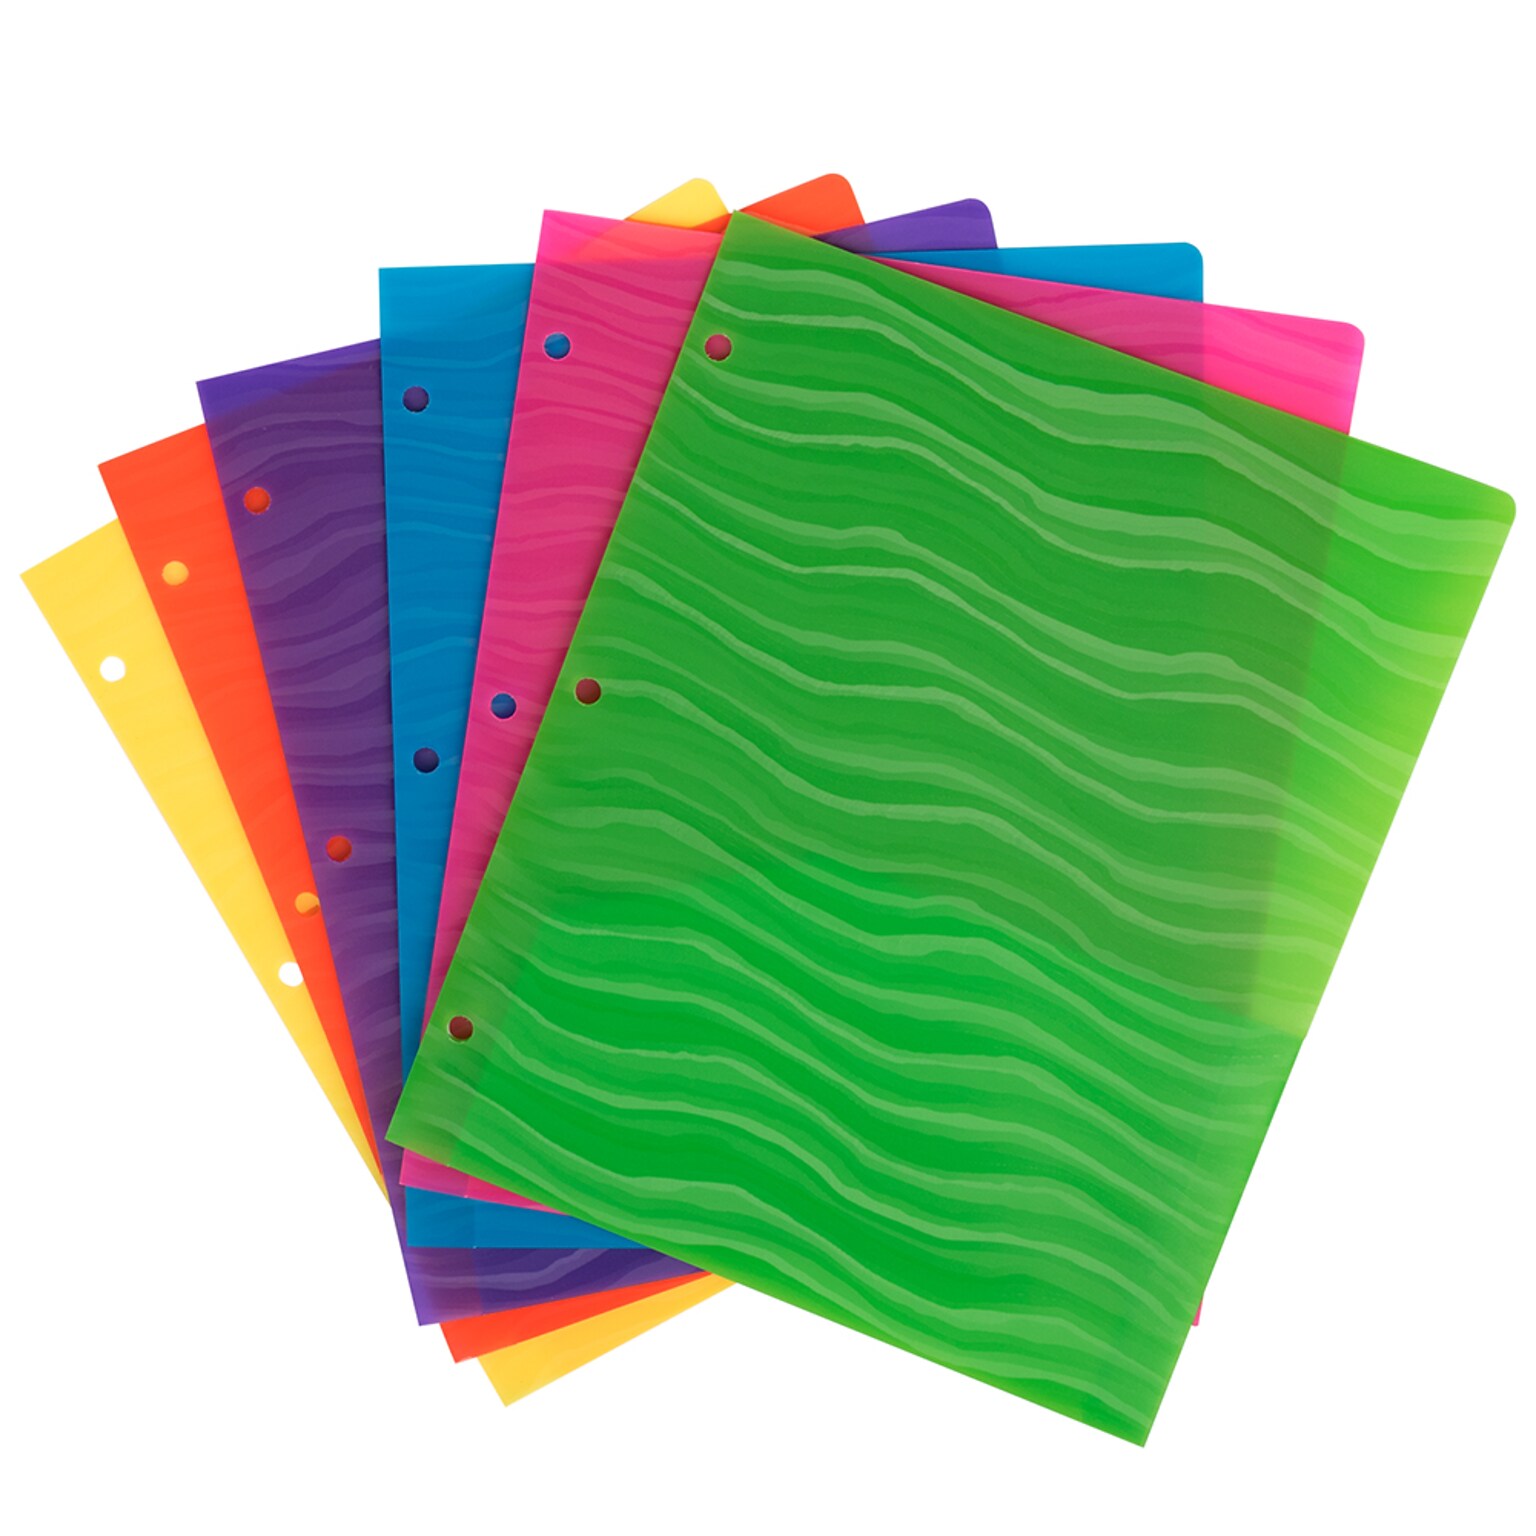 JAM Paper Heavy Duty 3-Hole Punched 2-Pocket Plastic Folders, Multicolored, Assorted Wave Colors, 6/Pack (383HPWAVEAST)